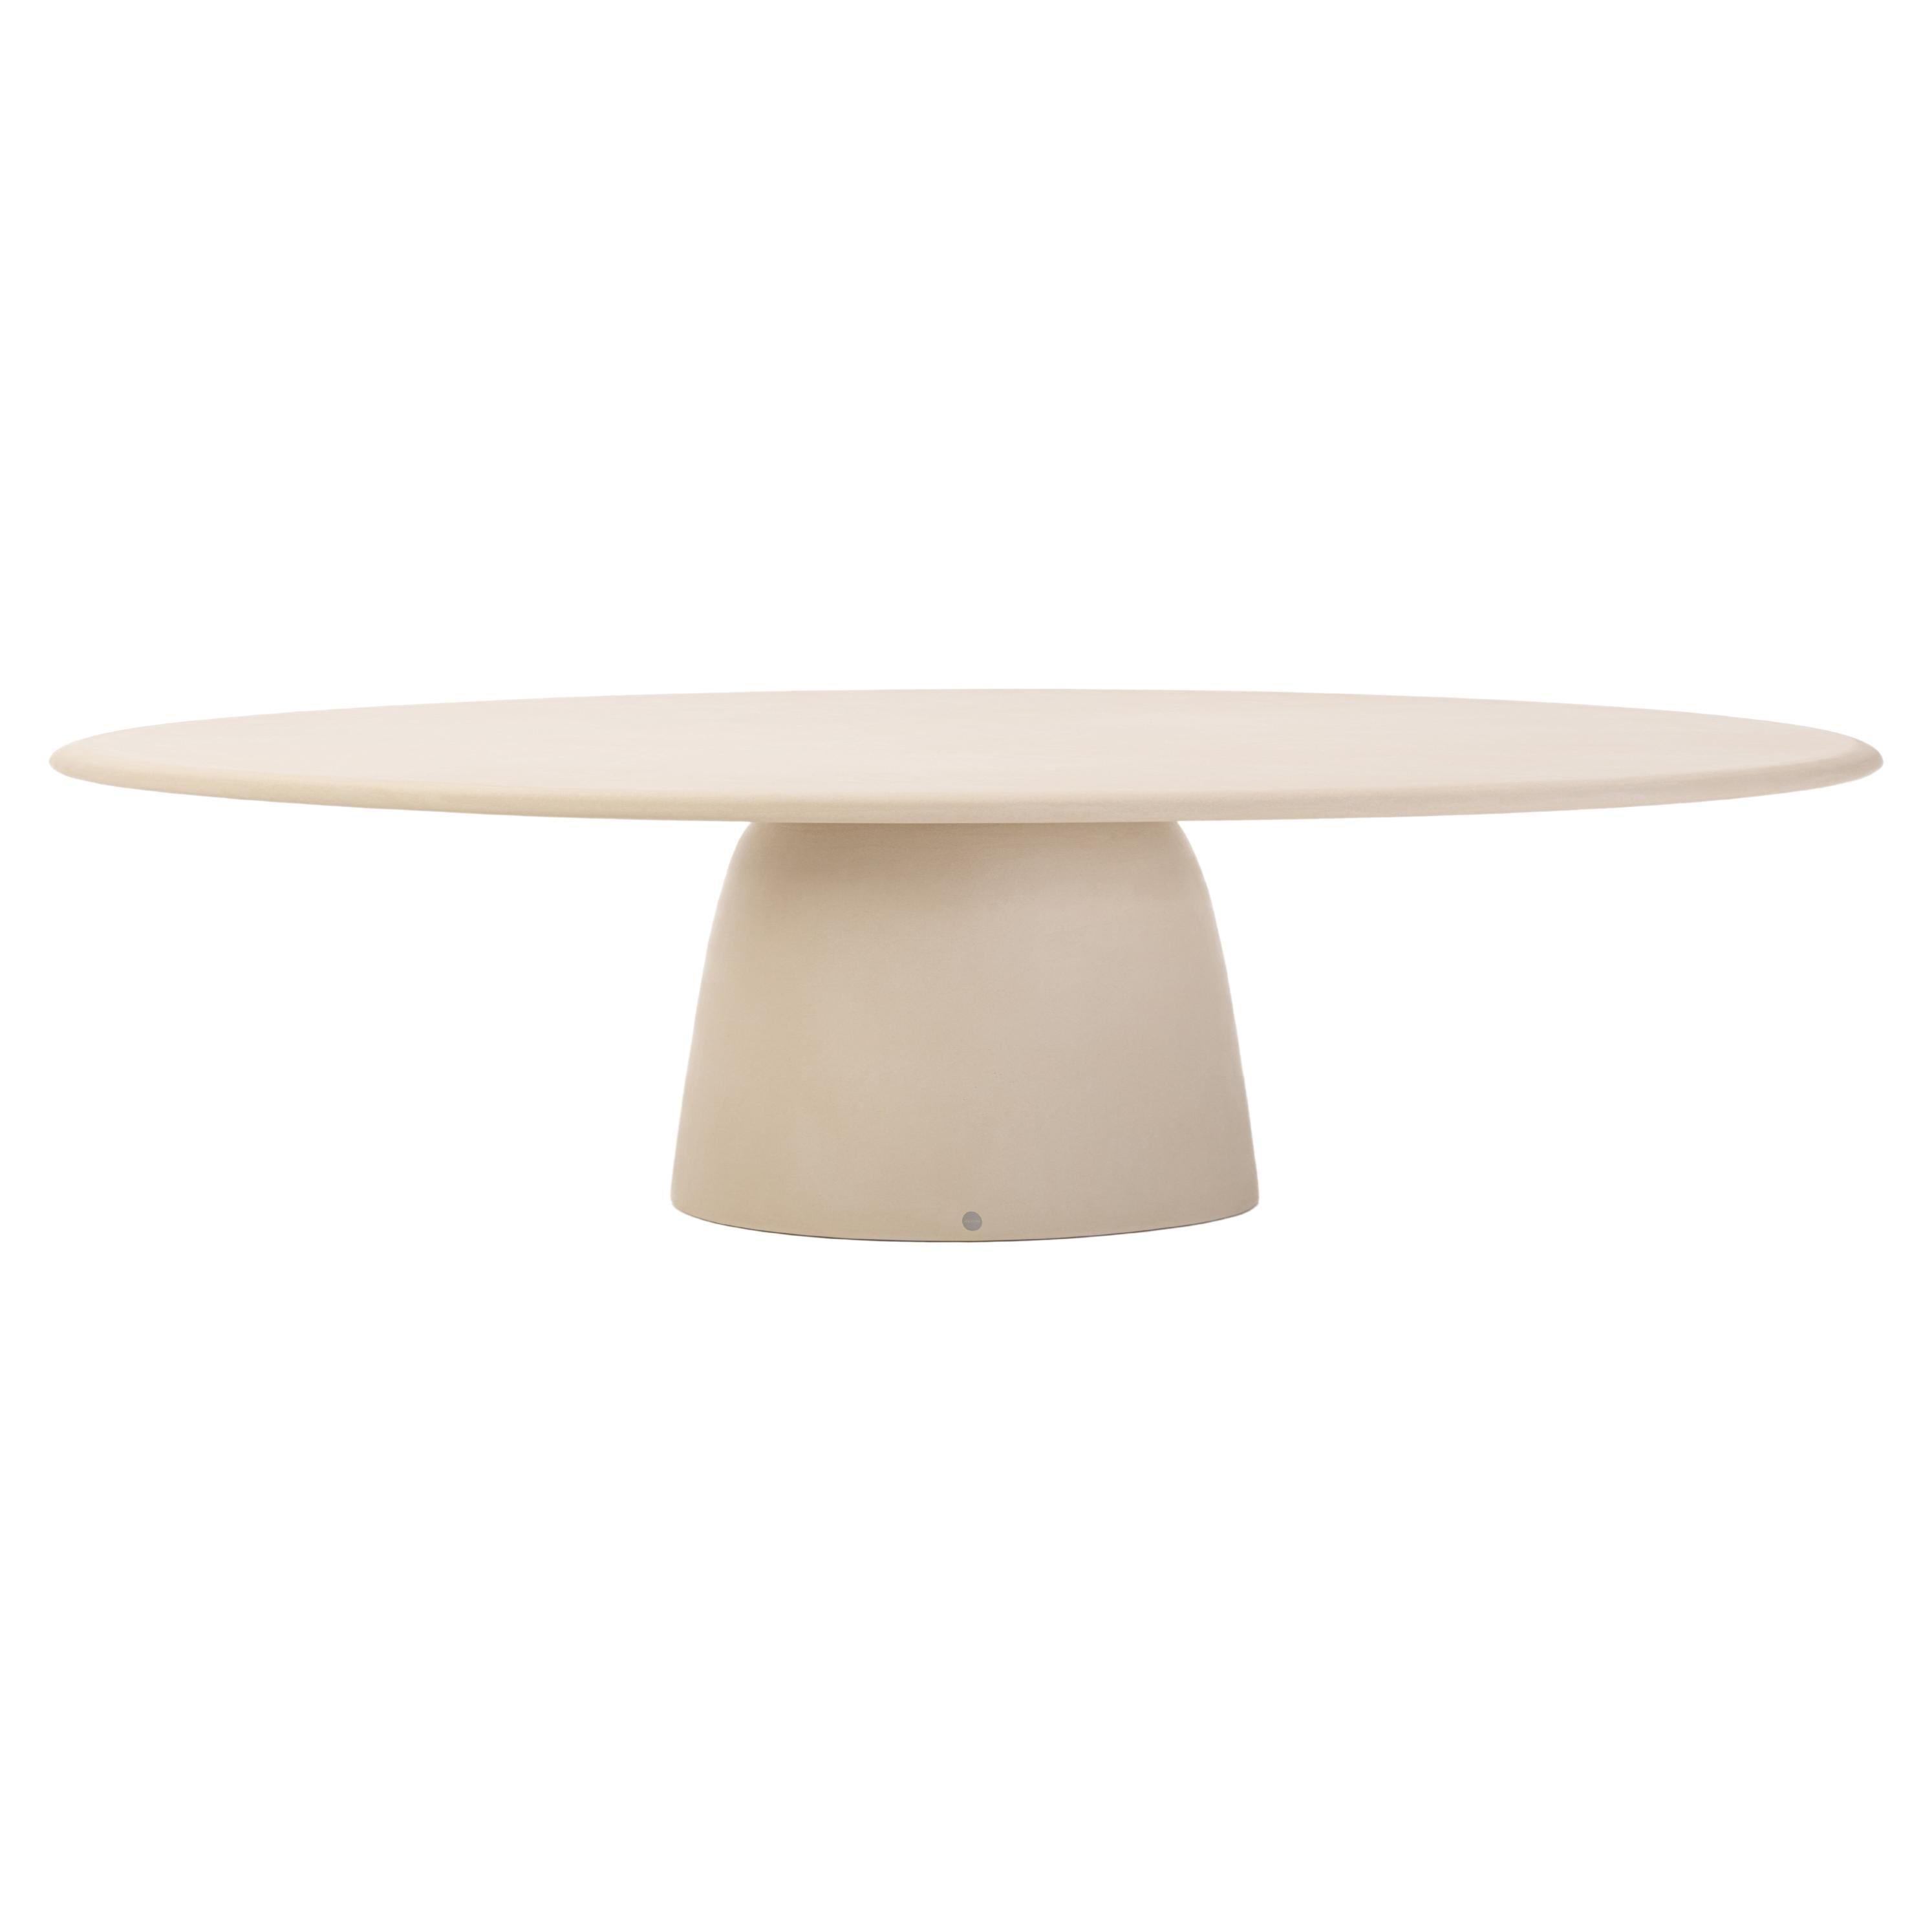 Contemporary Round Natural Plaster "Menhir" Table 300cm by Isabelle Beaumont For Sale